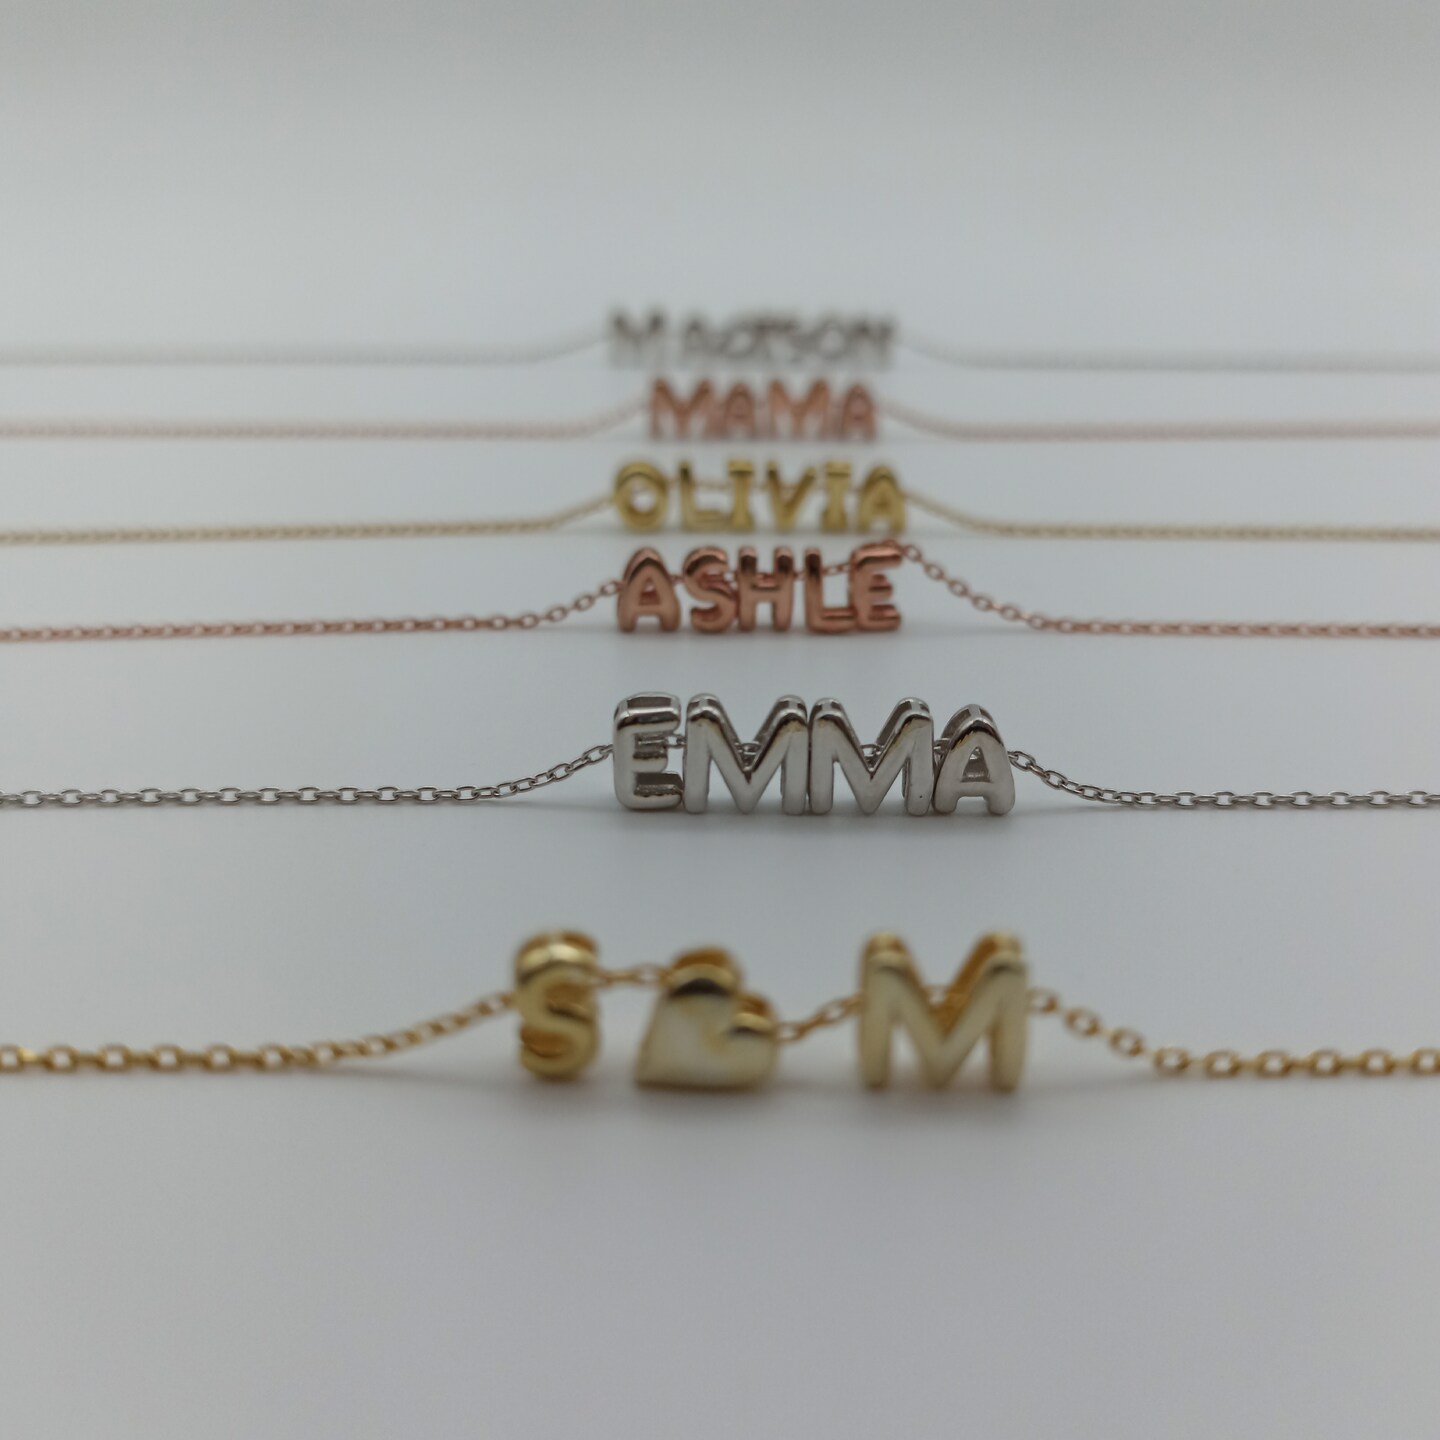 Meaningful jewelry mama letter necklace for| Alibaba.com